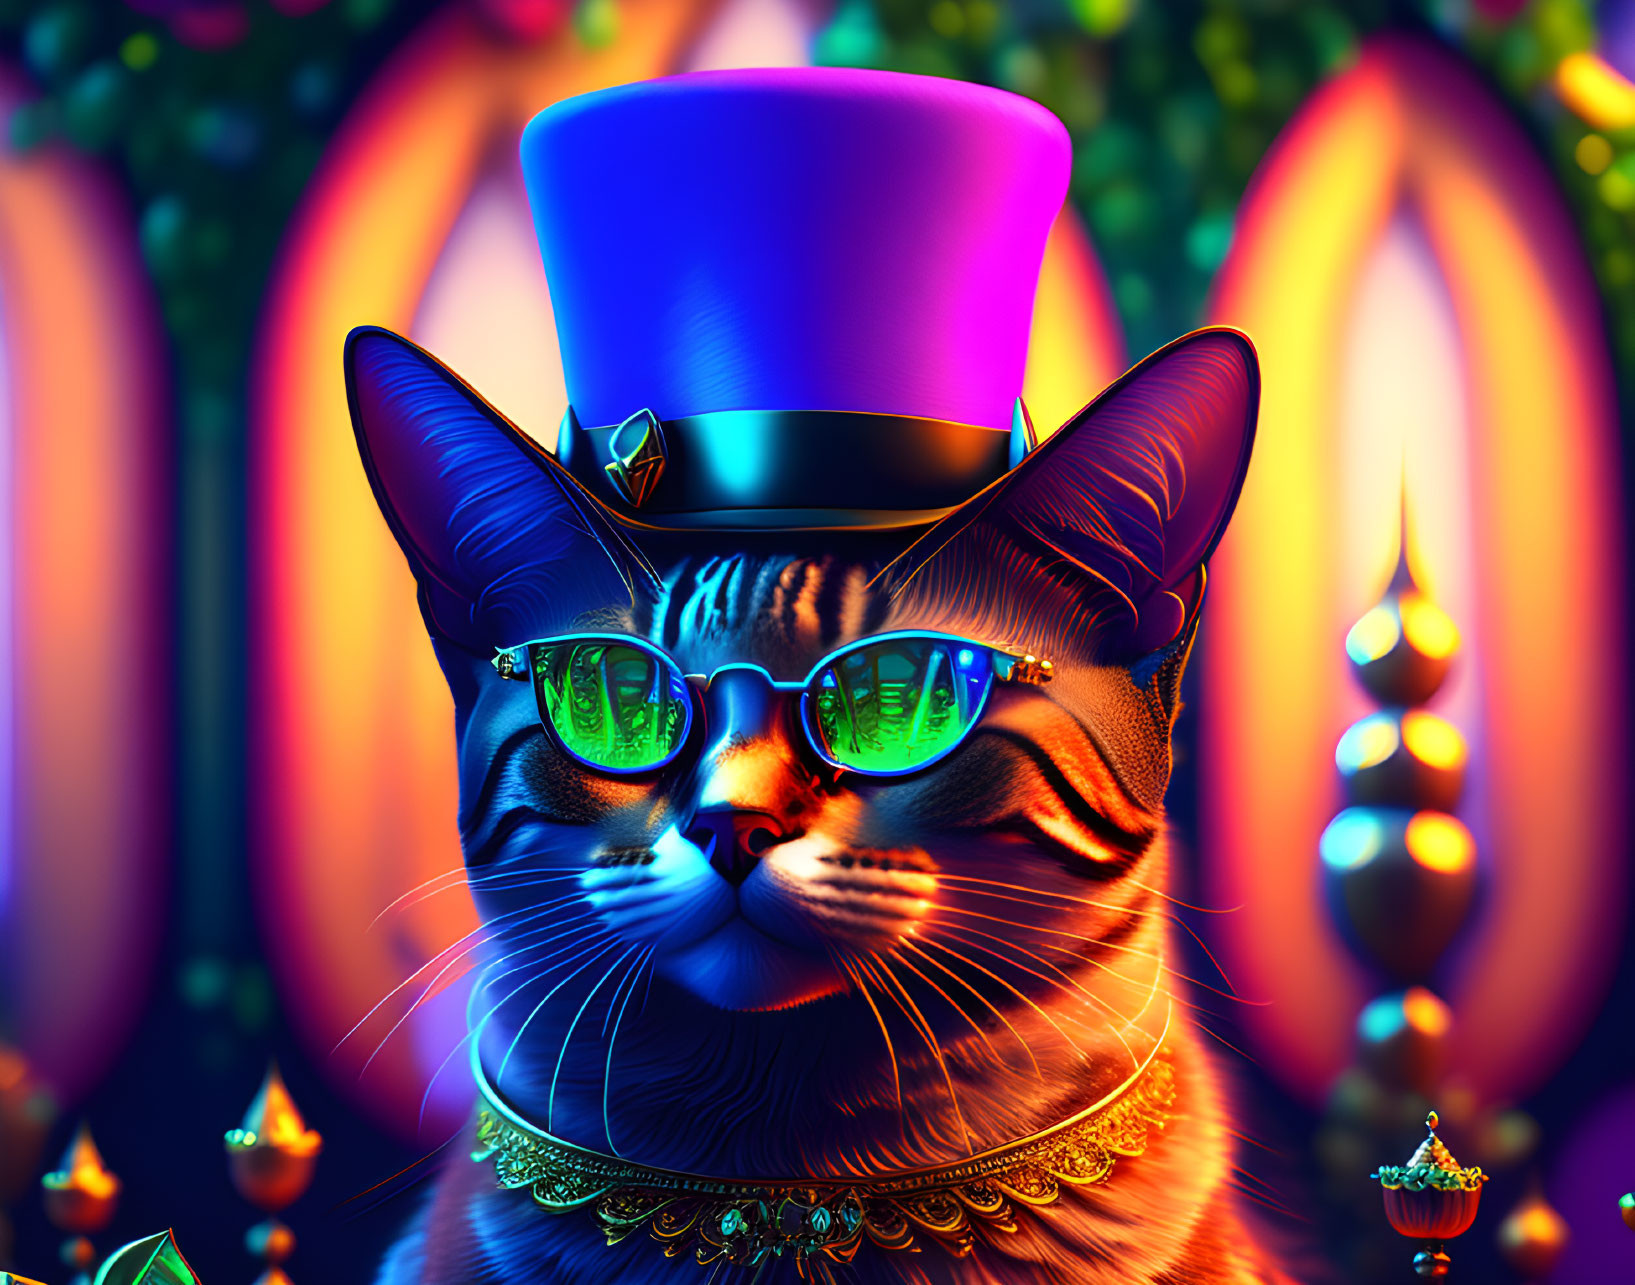 Colorful digital artwork: Cat in glasses, top hat, and necklace on ornate background